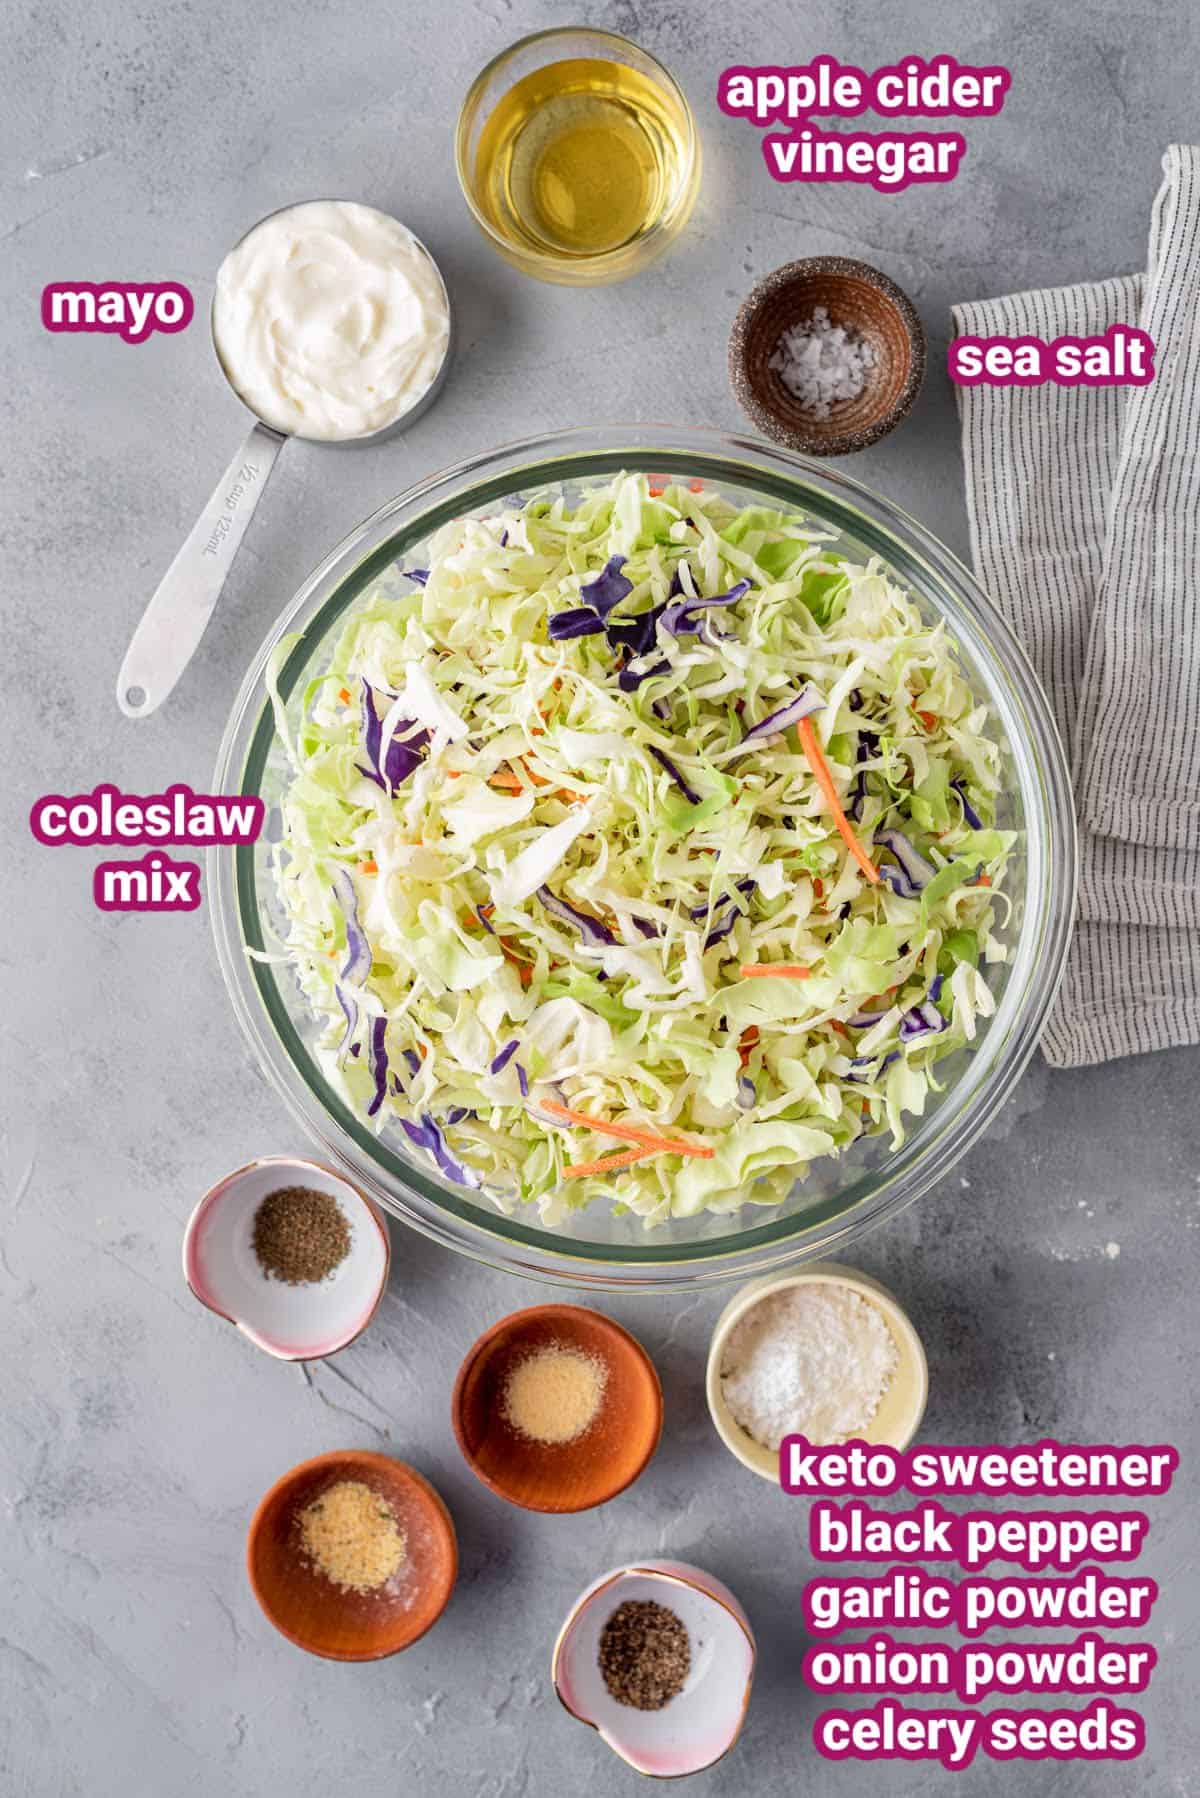 the ingredients for low carb keto coleslaw like coleslaw mix, keto sweetener, garlic powder, onion powder, black pepper, sea salt, apple cider, vinegar, and low carb mayonnaise in separate bowls